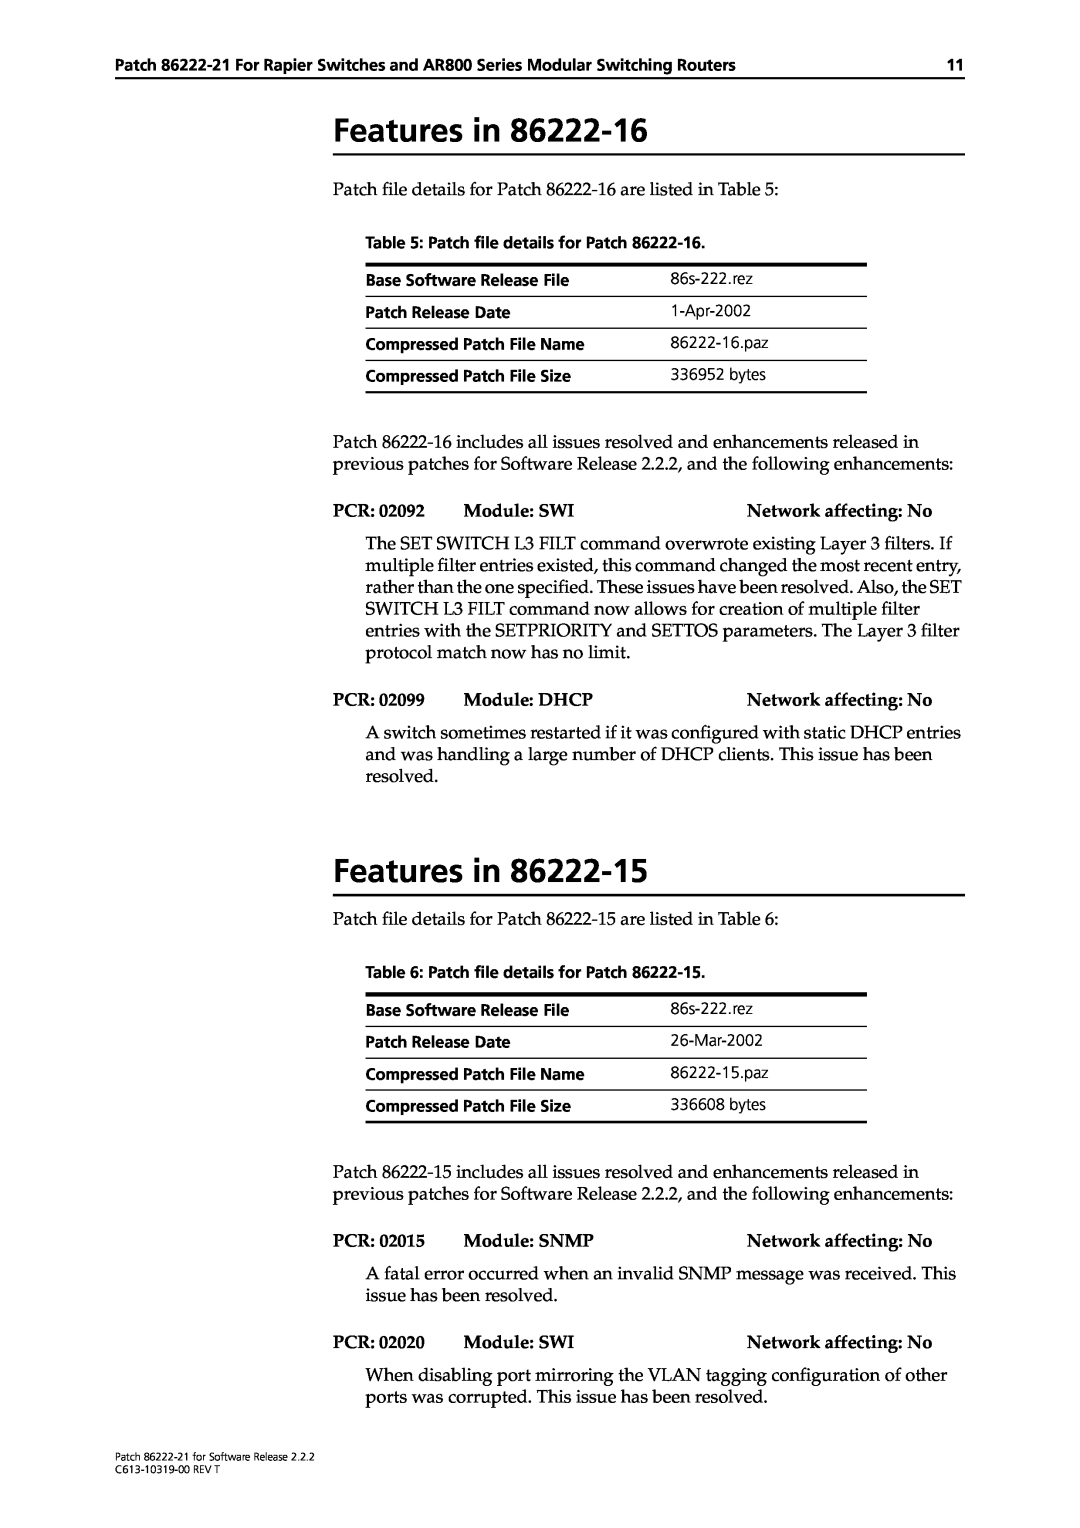 Allied Telesis 86222-21 manual Features in, Patch file details for Patch 86222-16 are listed in Table 